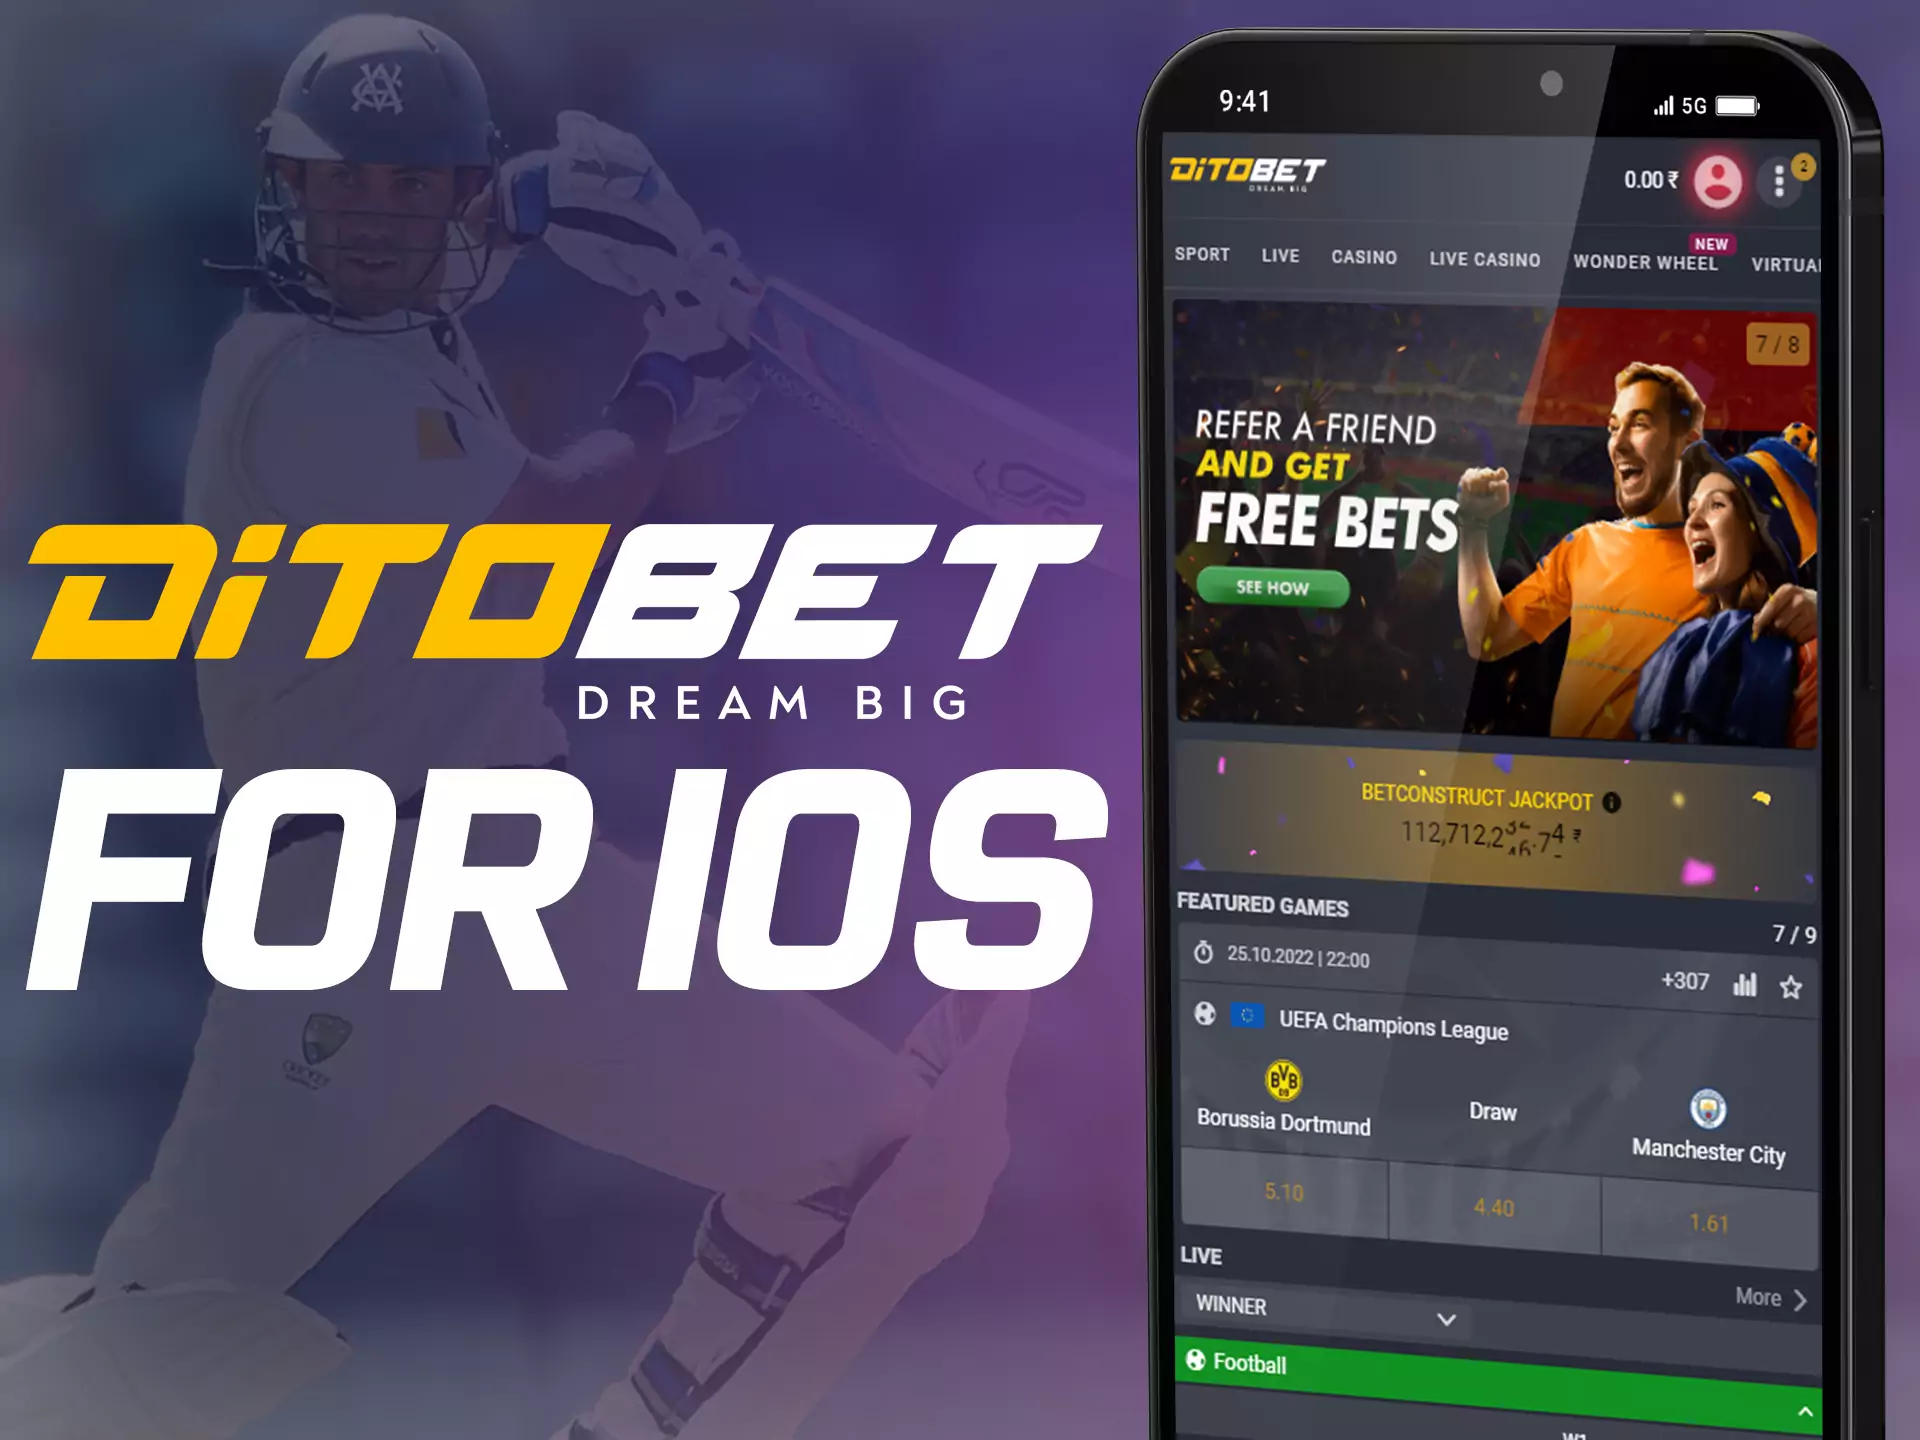 Play with Ditobet on any iOS device.